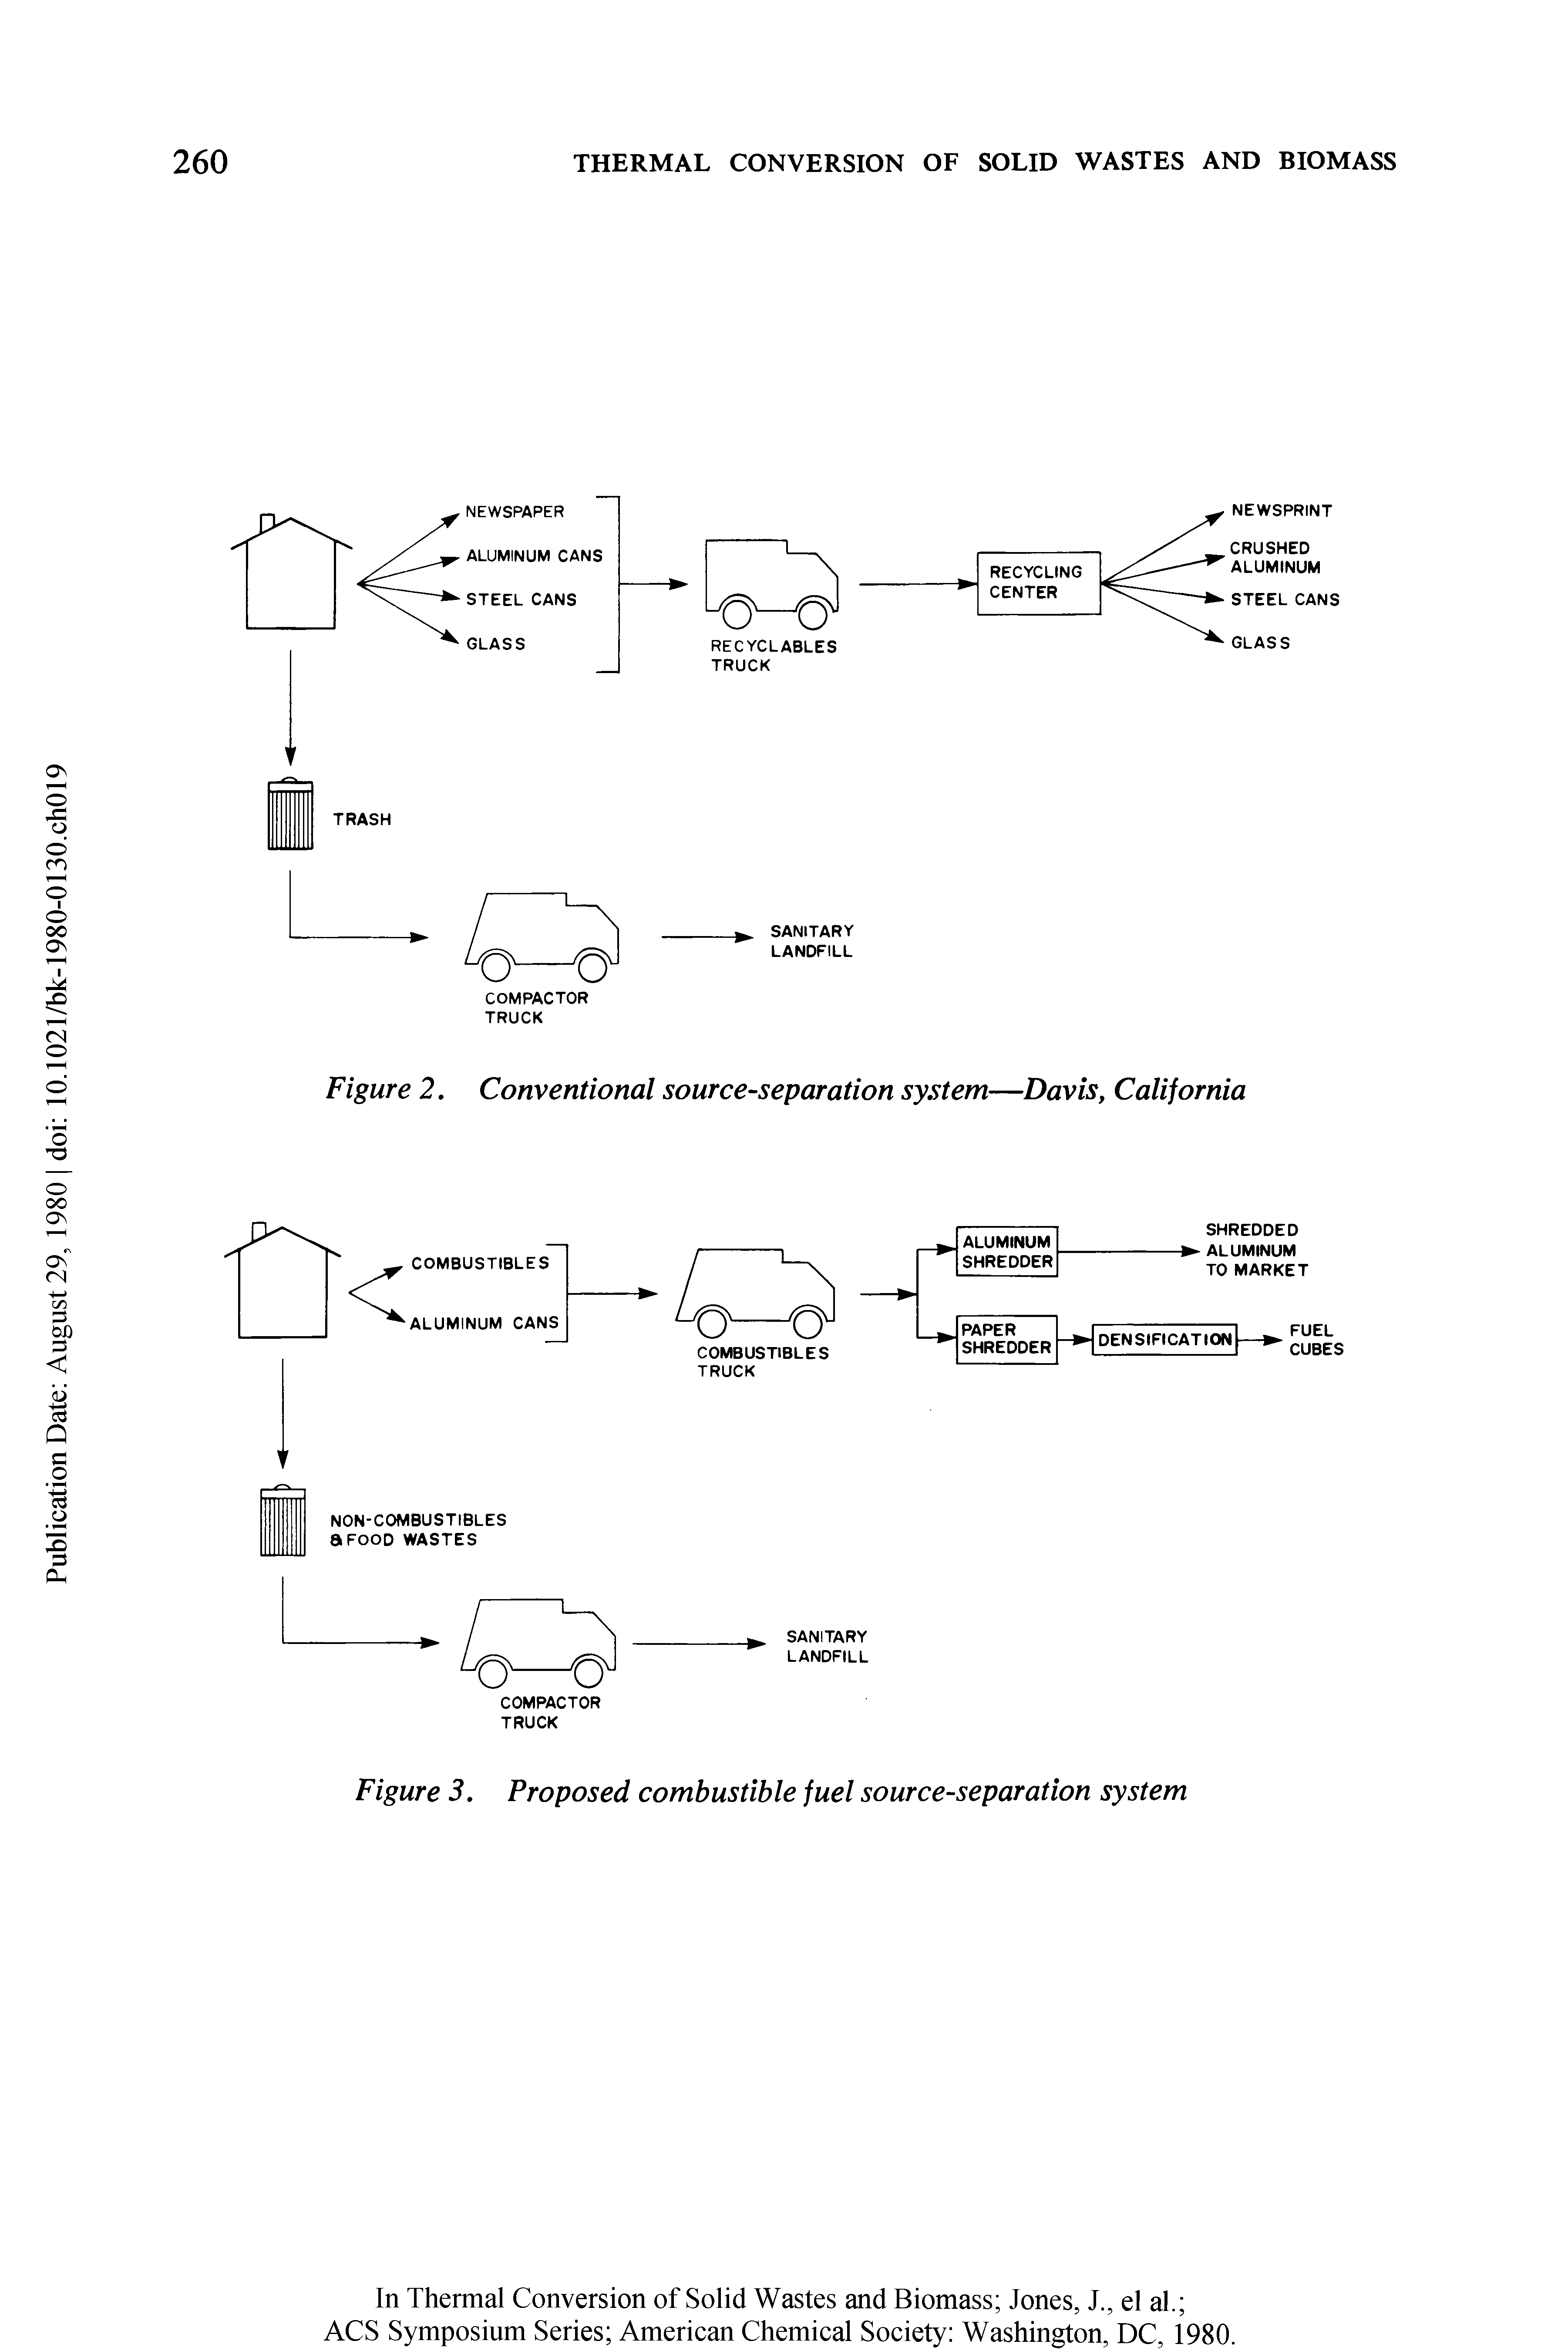 Figure 3. Proposed combustible fuel source-separation system...